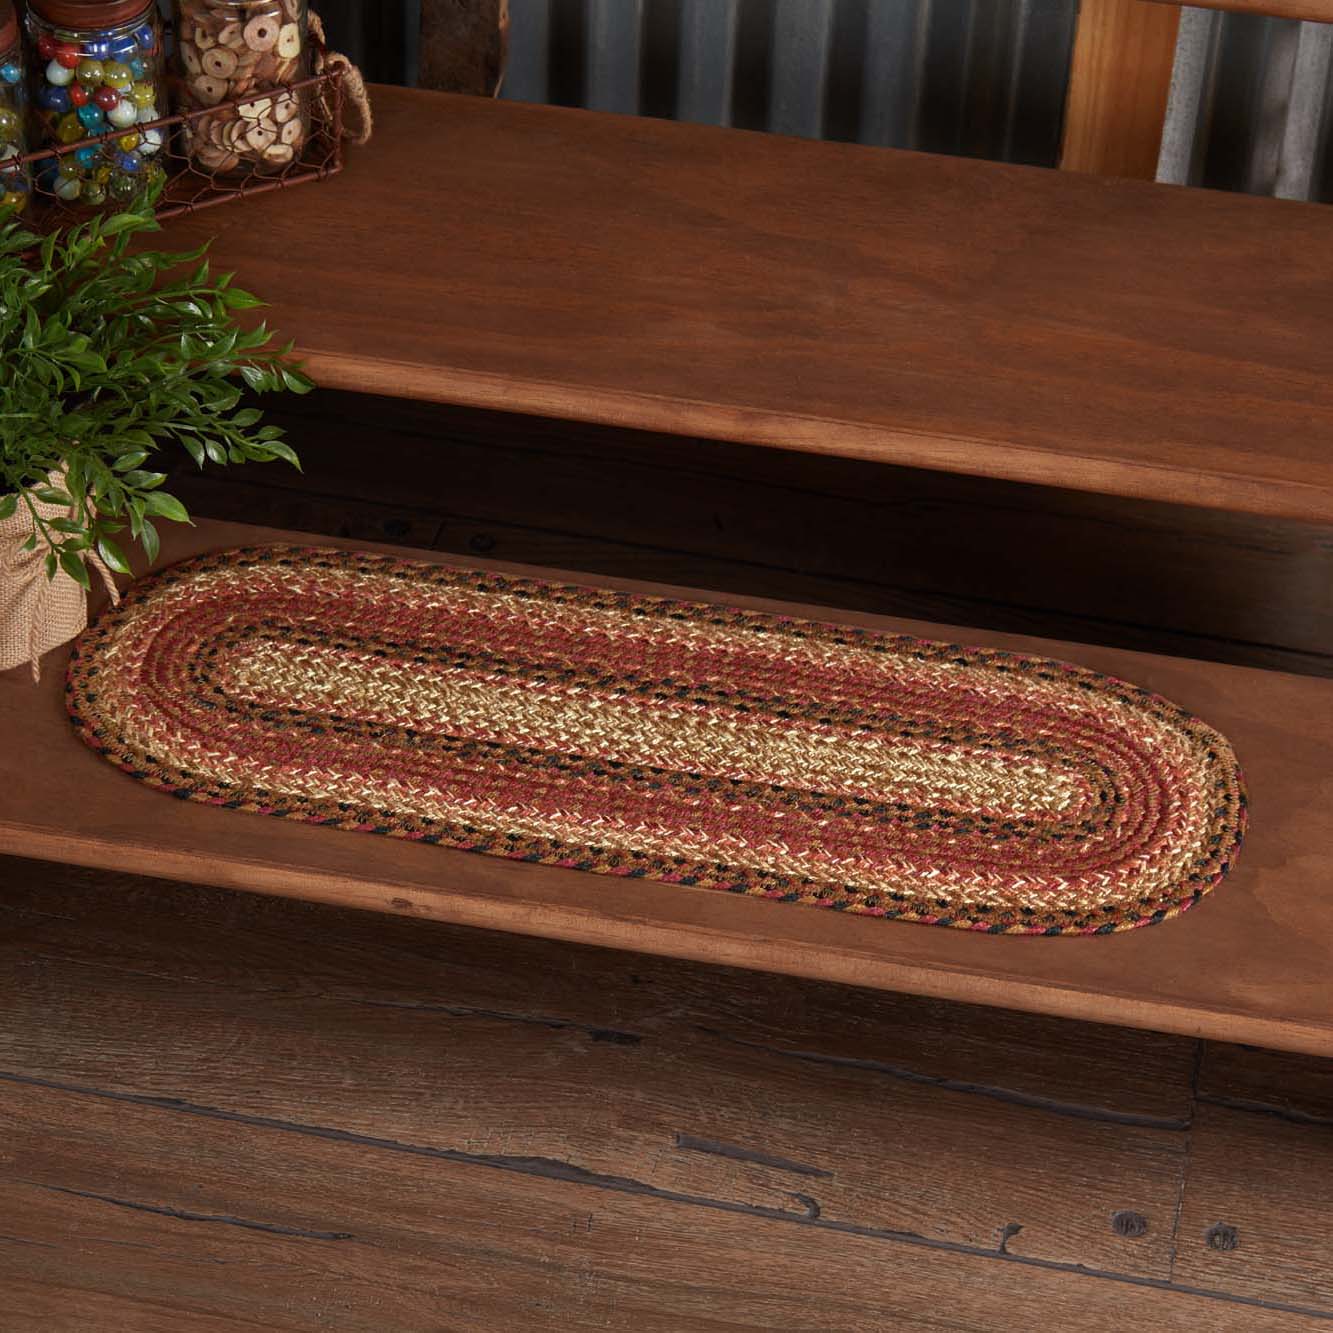 Log Cabin Step Cotton Braided Rug  Country Primitive Braided Rug